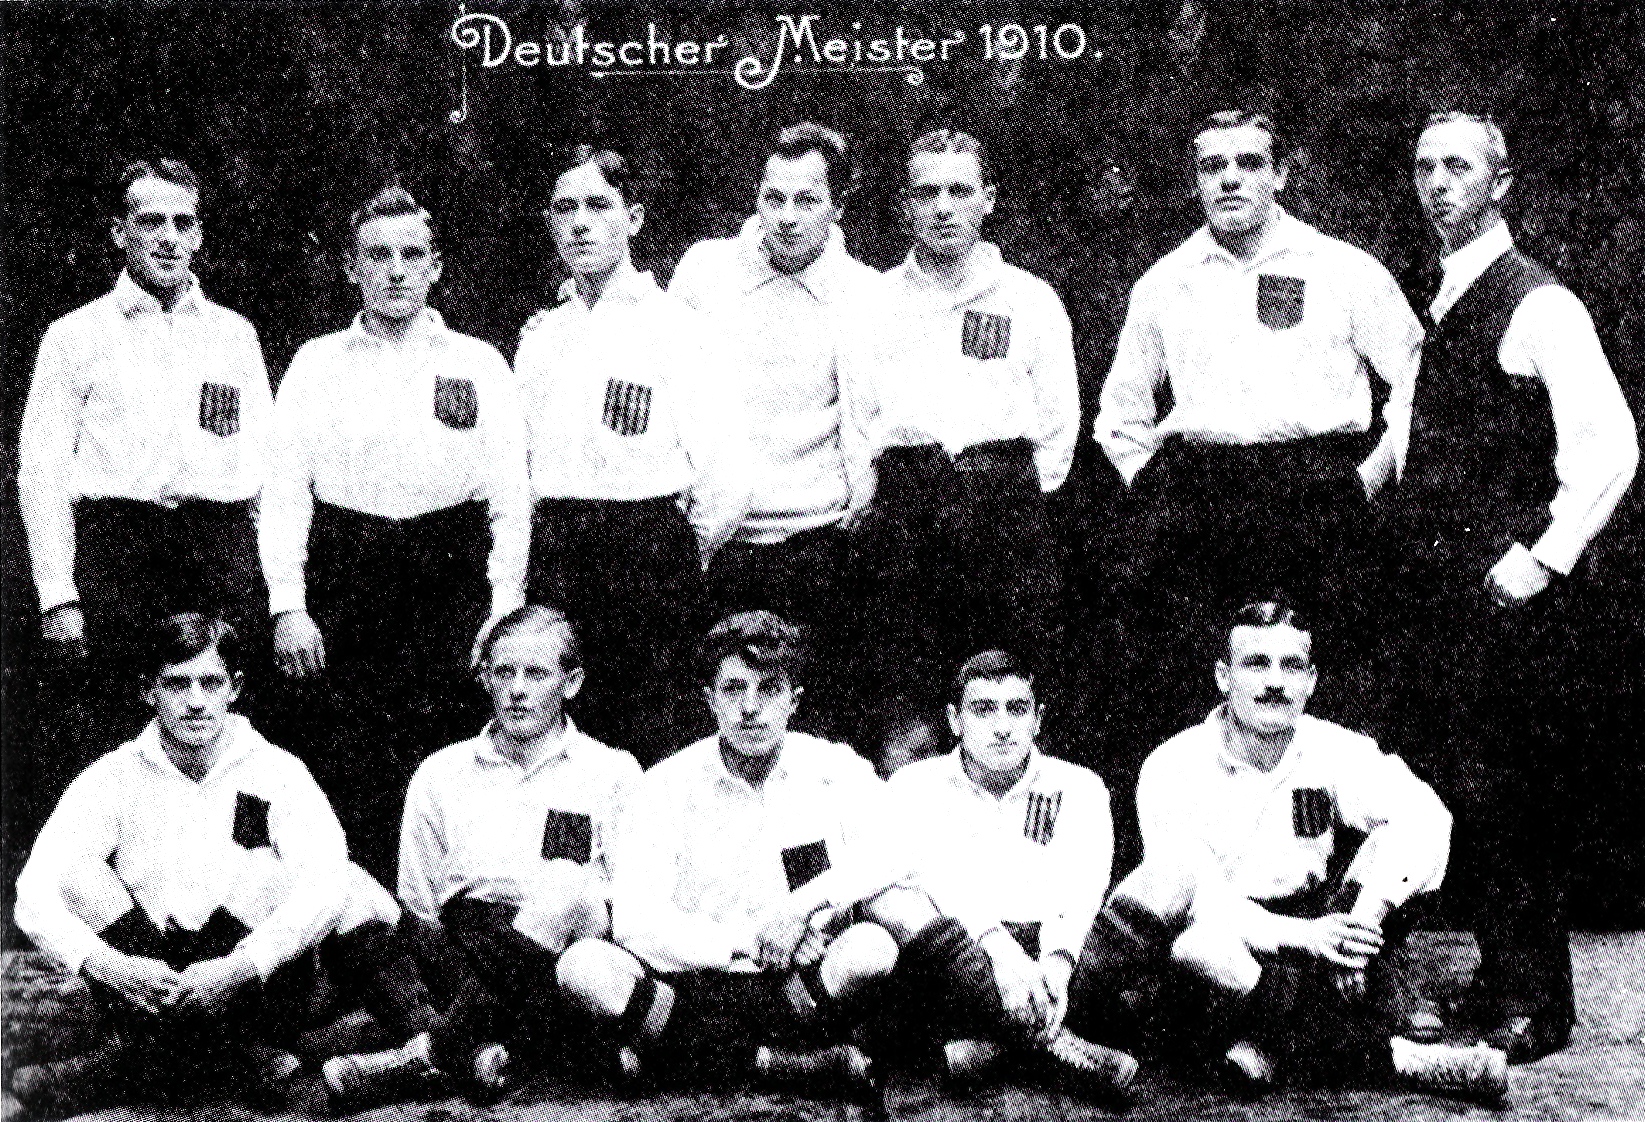 Julius Hirsch (bottom row, second from right) in his Karlsruher FV football uniform, 1910